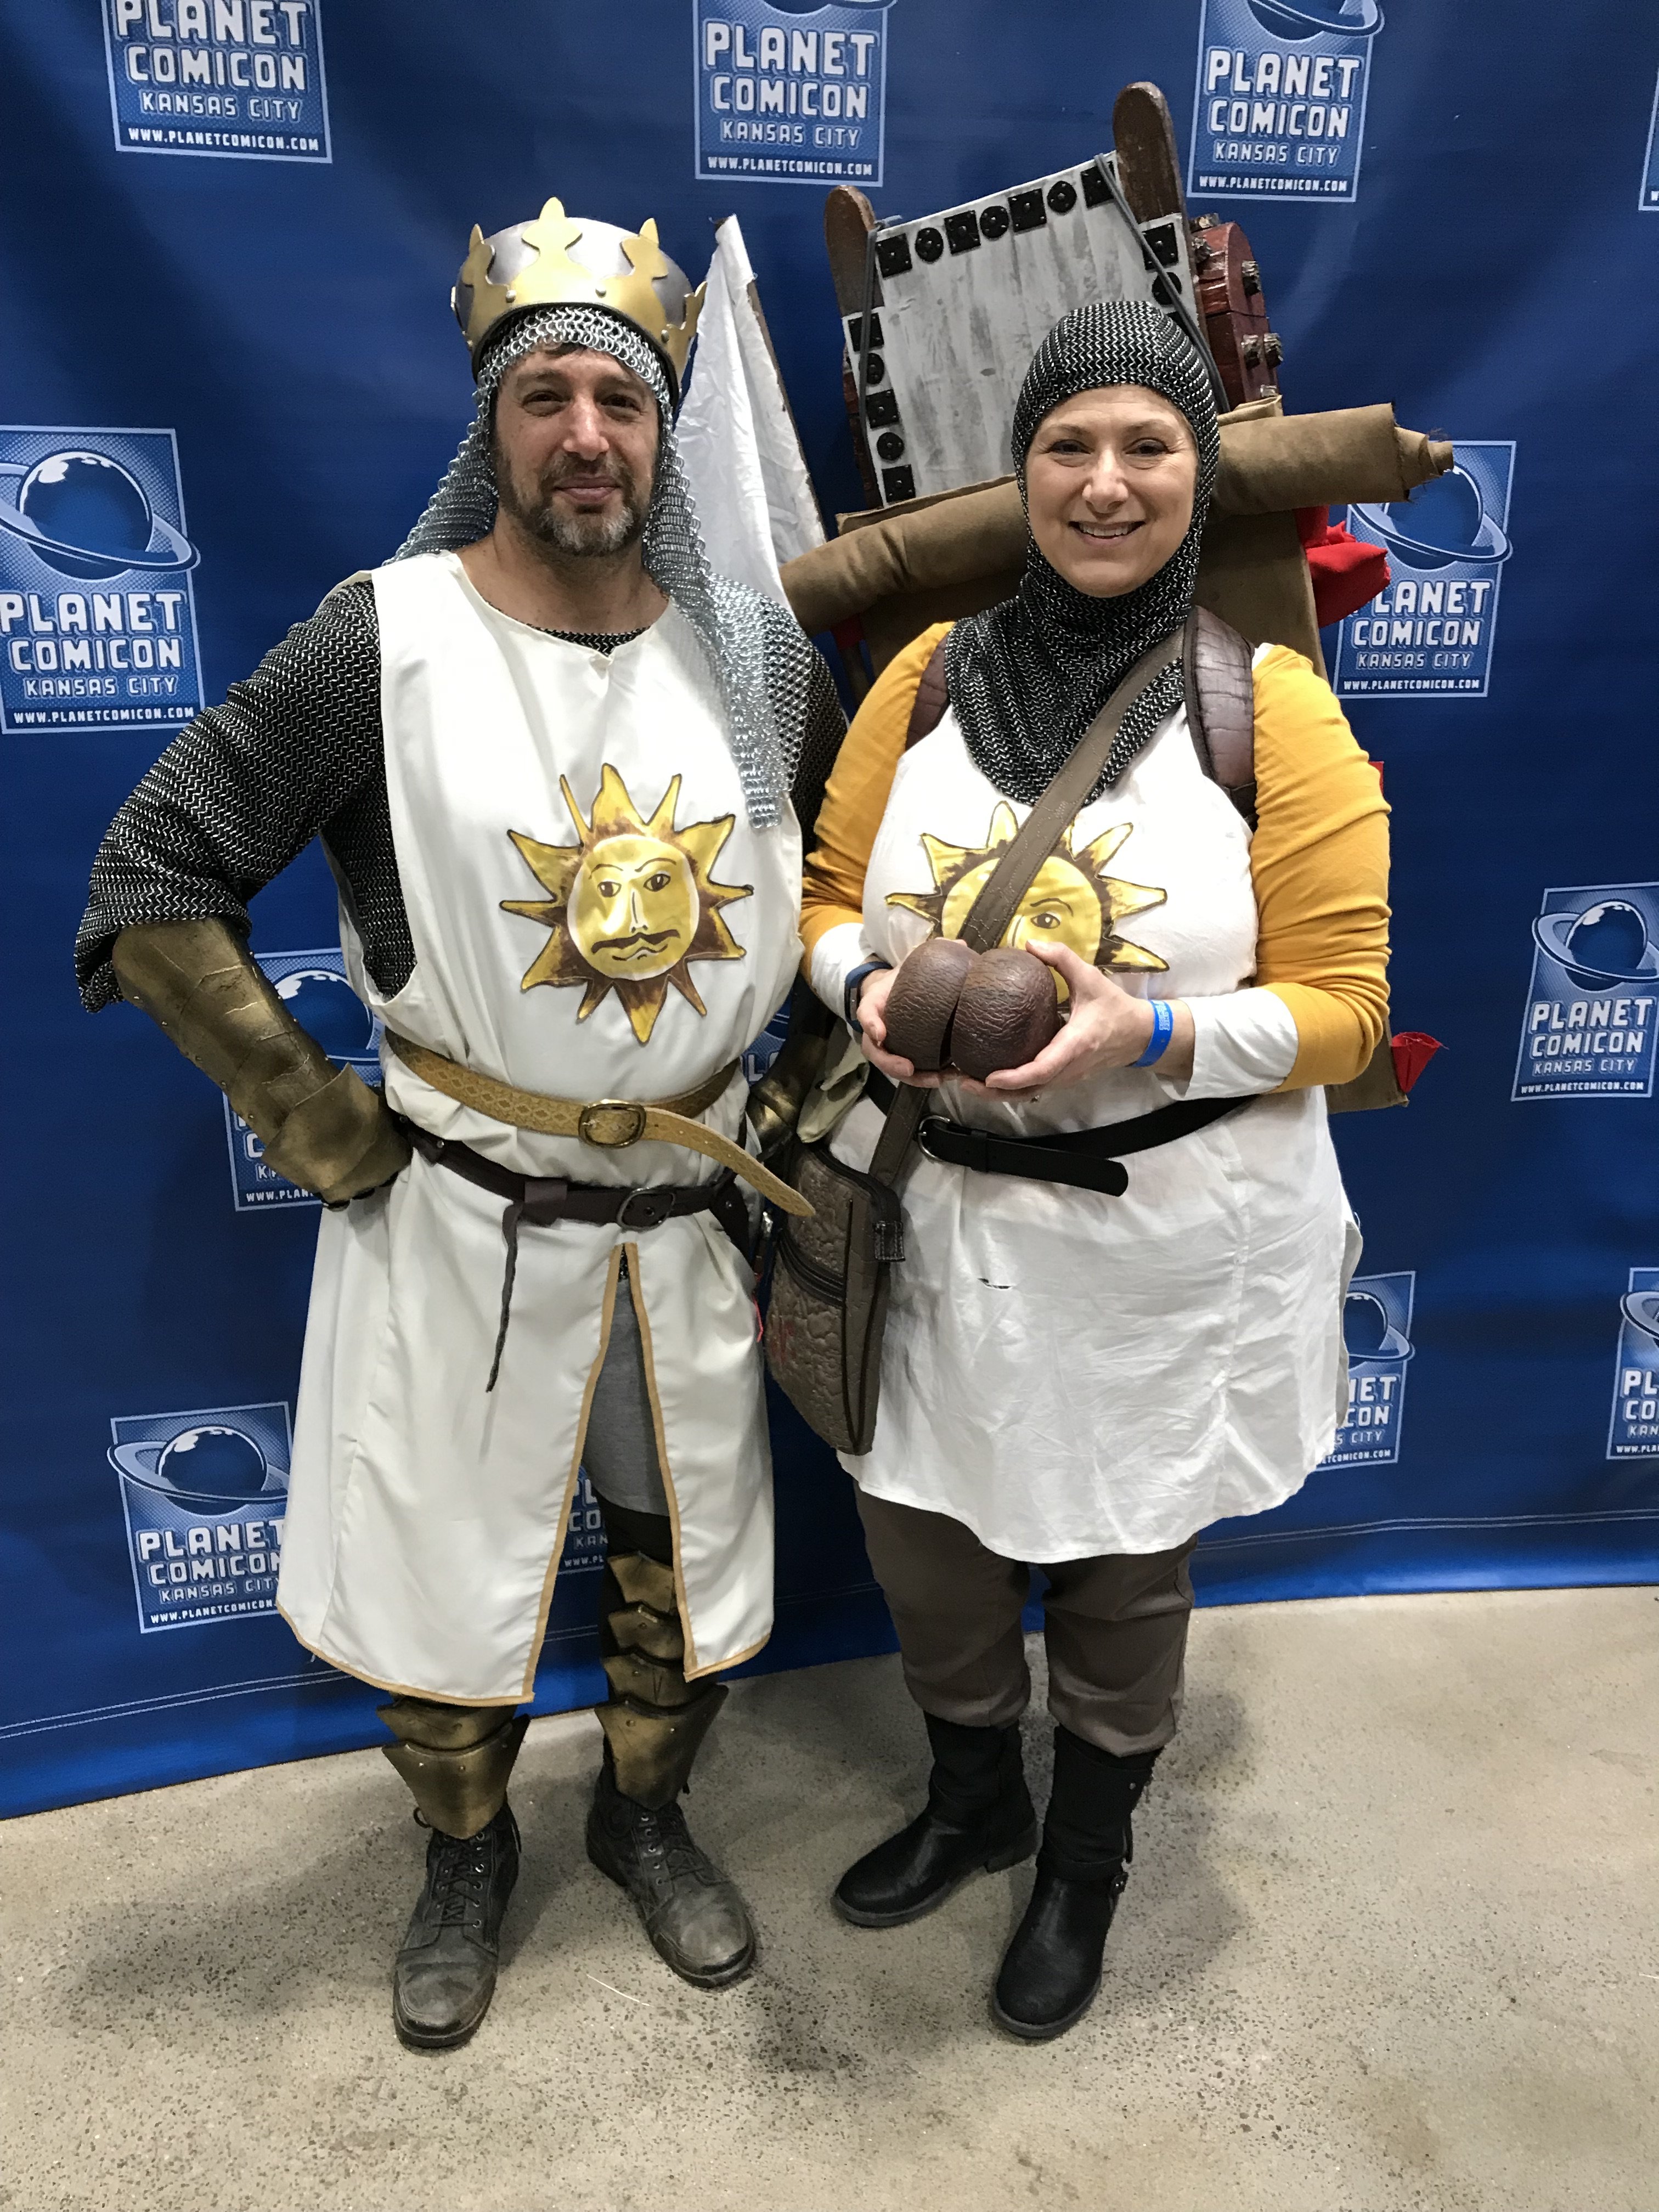 Monty Python and the Holy Grail - Patsy Pack | RPF Costume and Prop Maker  Community